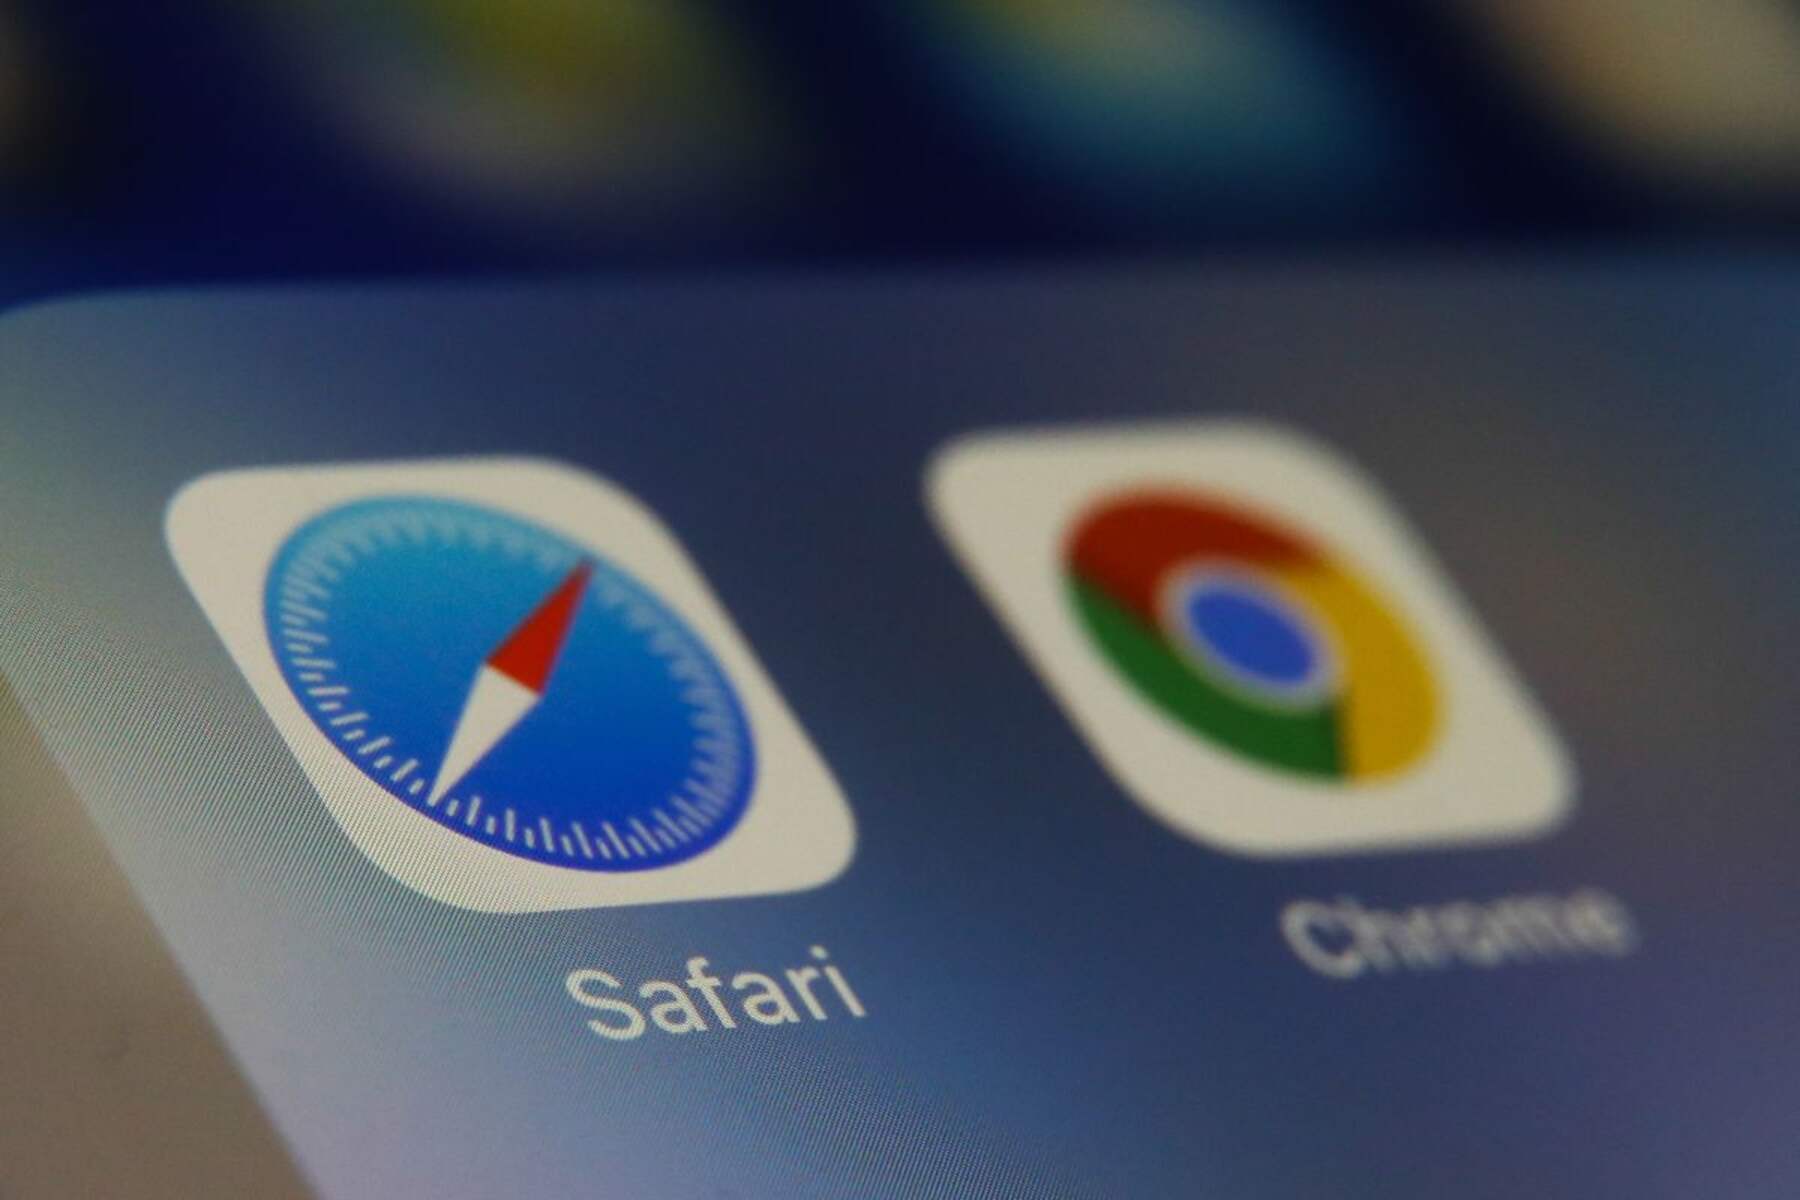 How To Transfer Passwords From Safari To Chrome